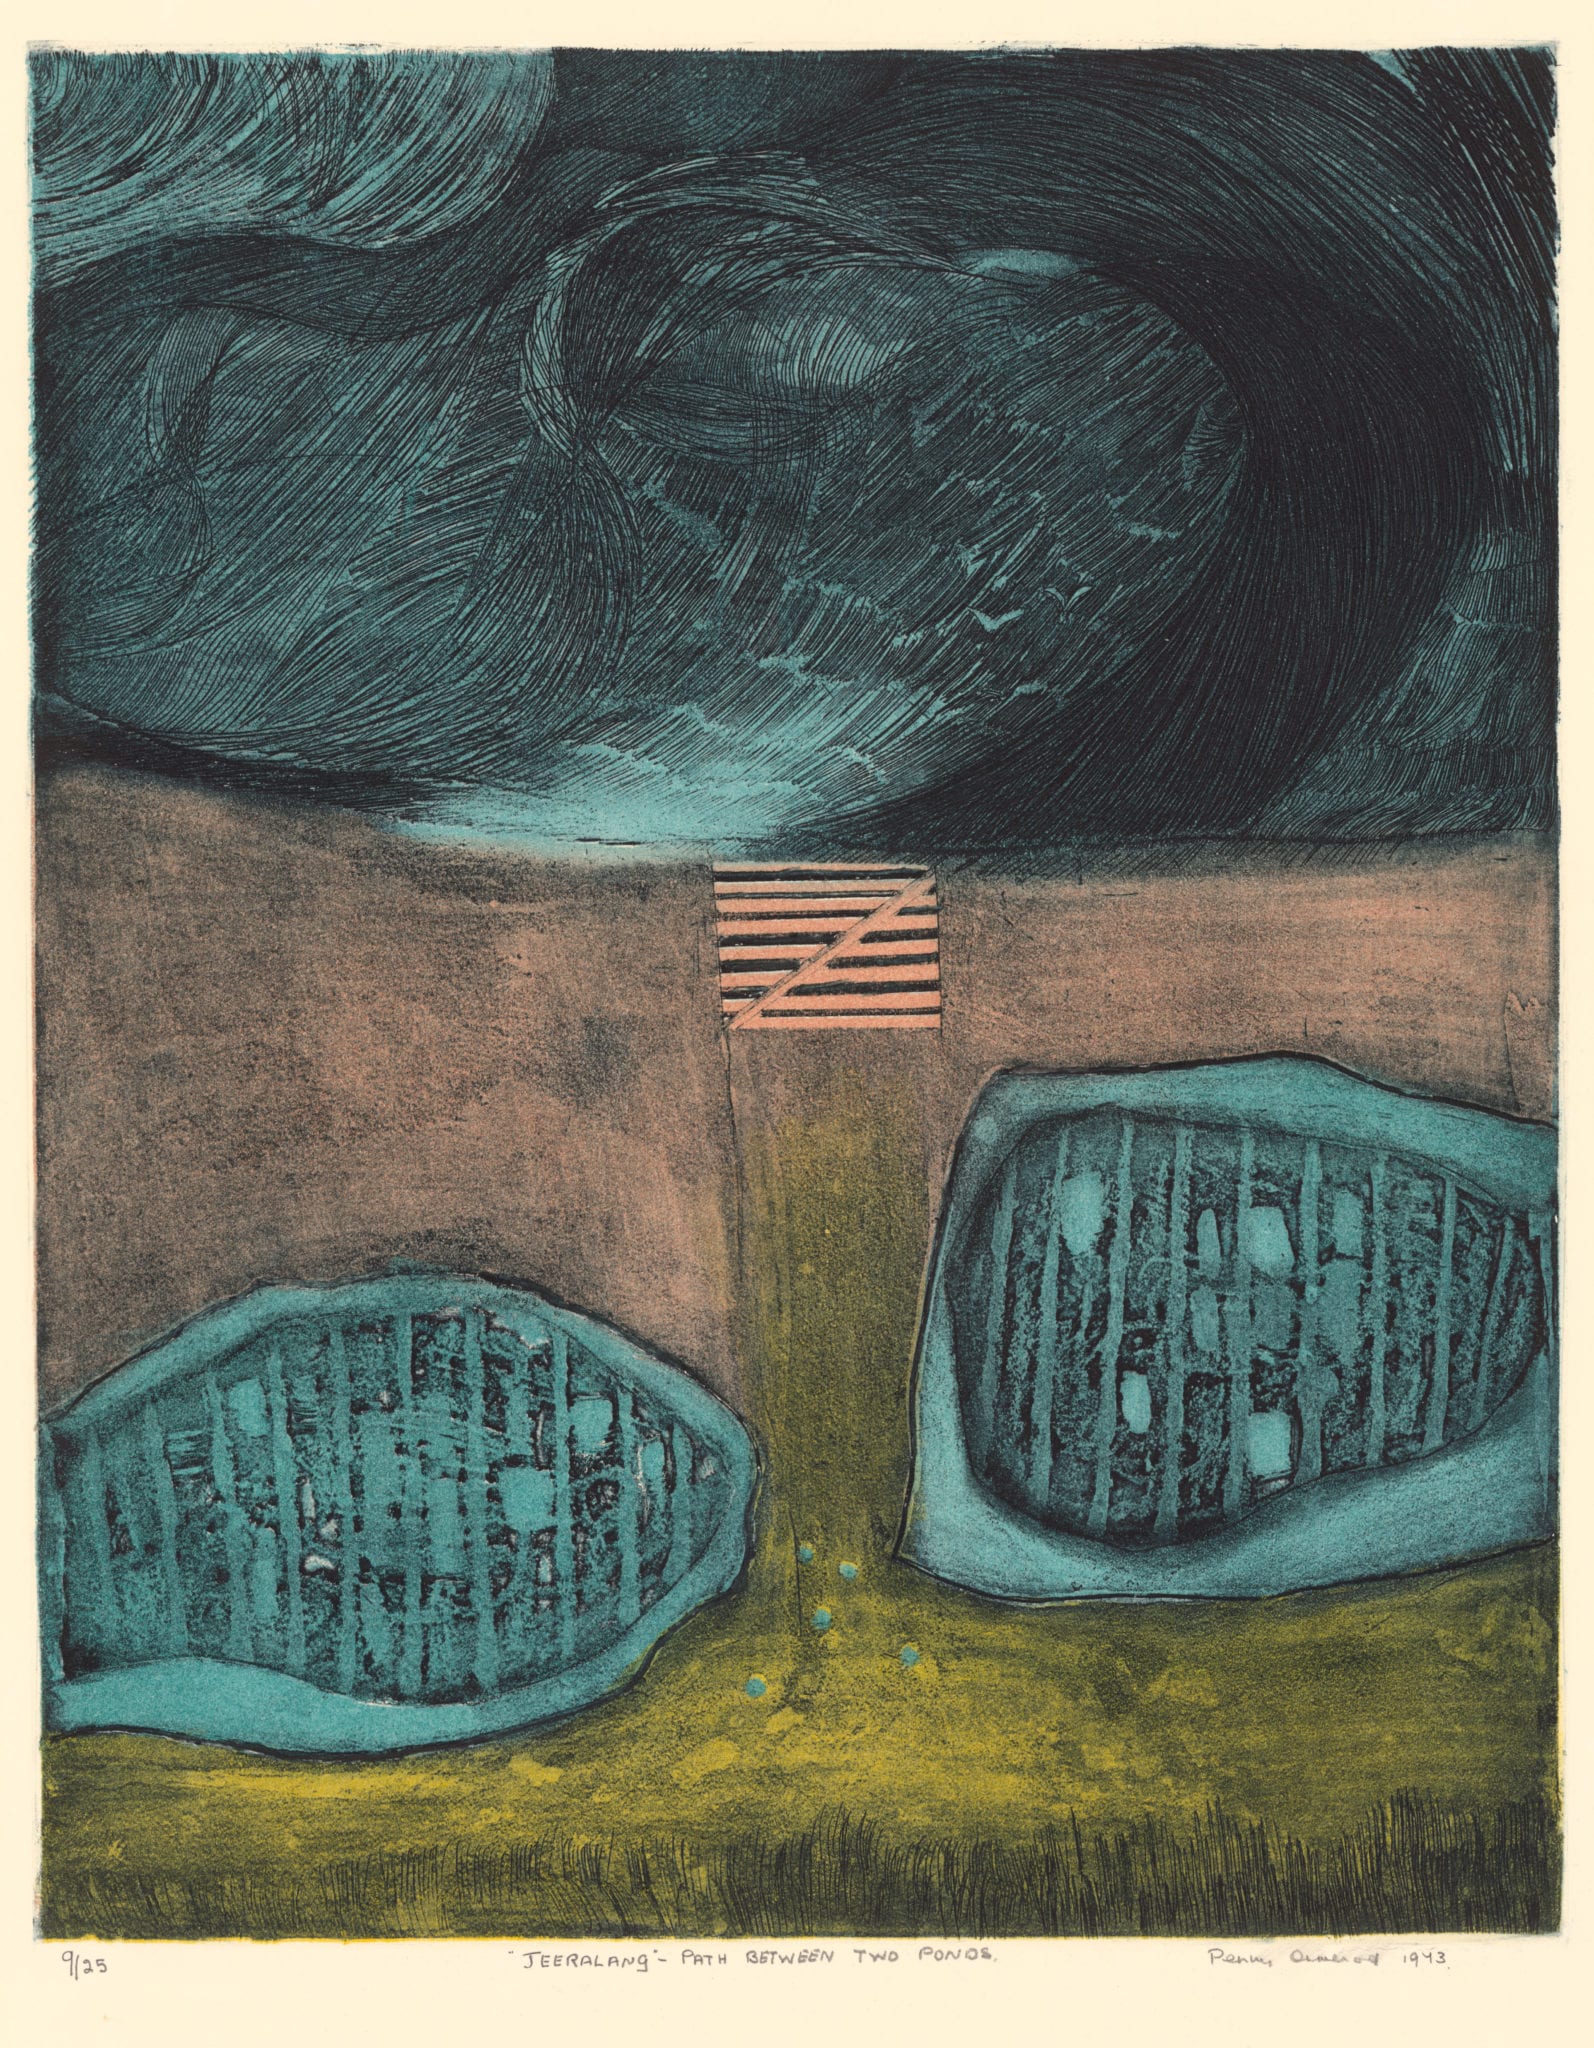 Penny Ormerod, Jeeralang – Path between two ponds, 1973, Etching and aquatint, 50 x 41 cm. Latrobe Regional Gallery Collection.